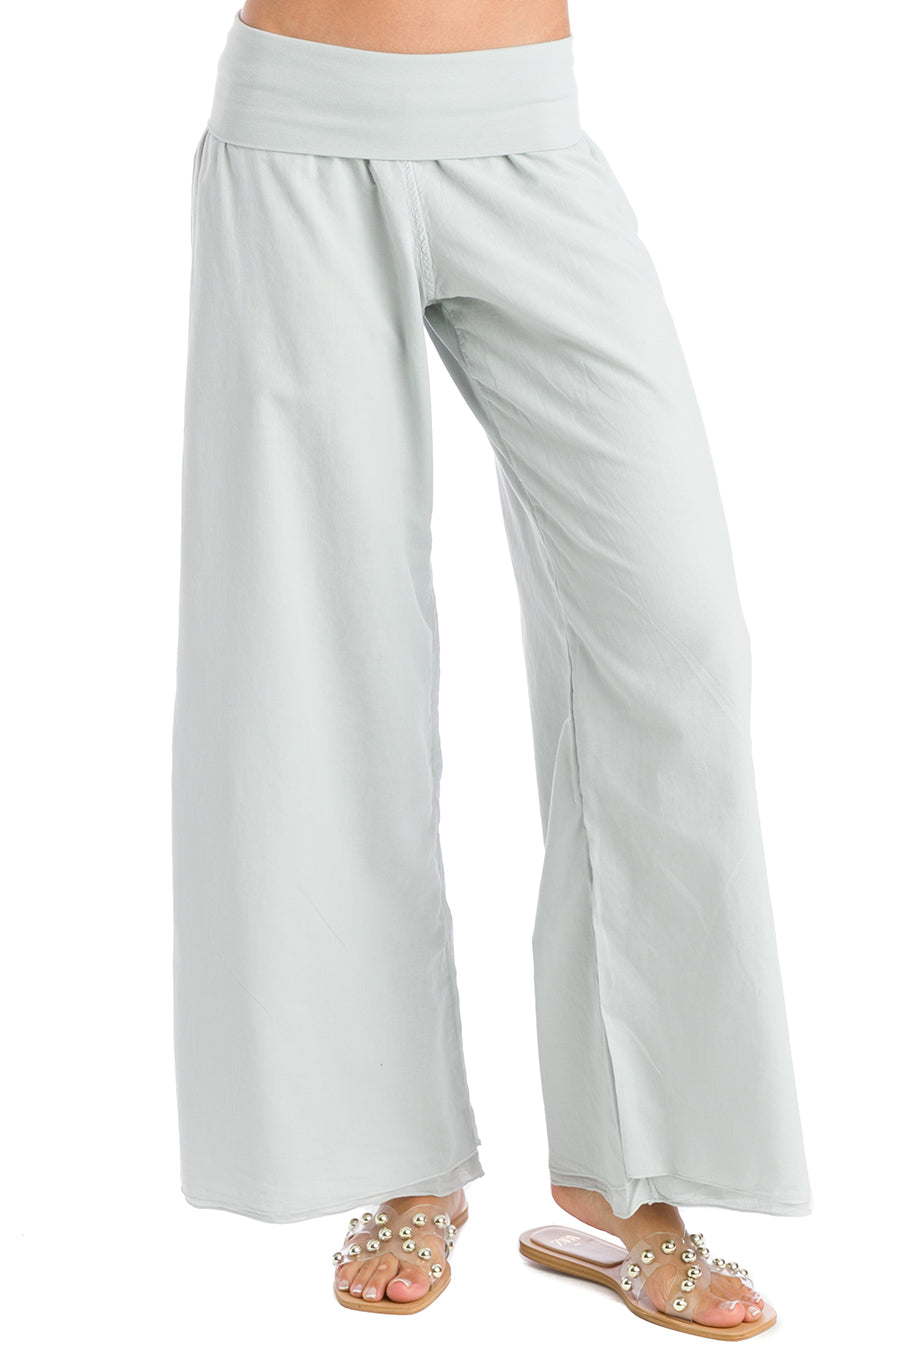 Hard Tail Forever Rolldown Double Layer Pants - Dove